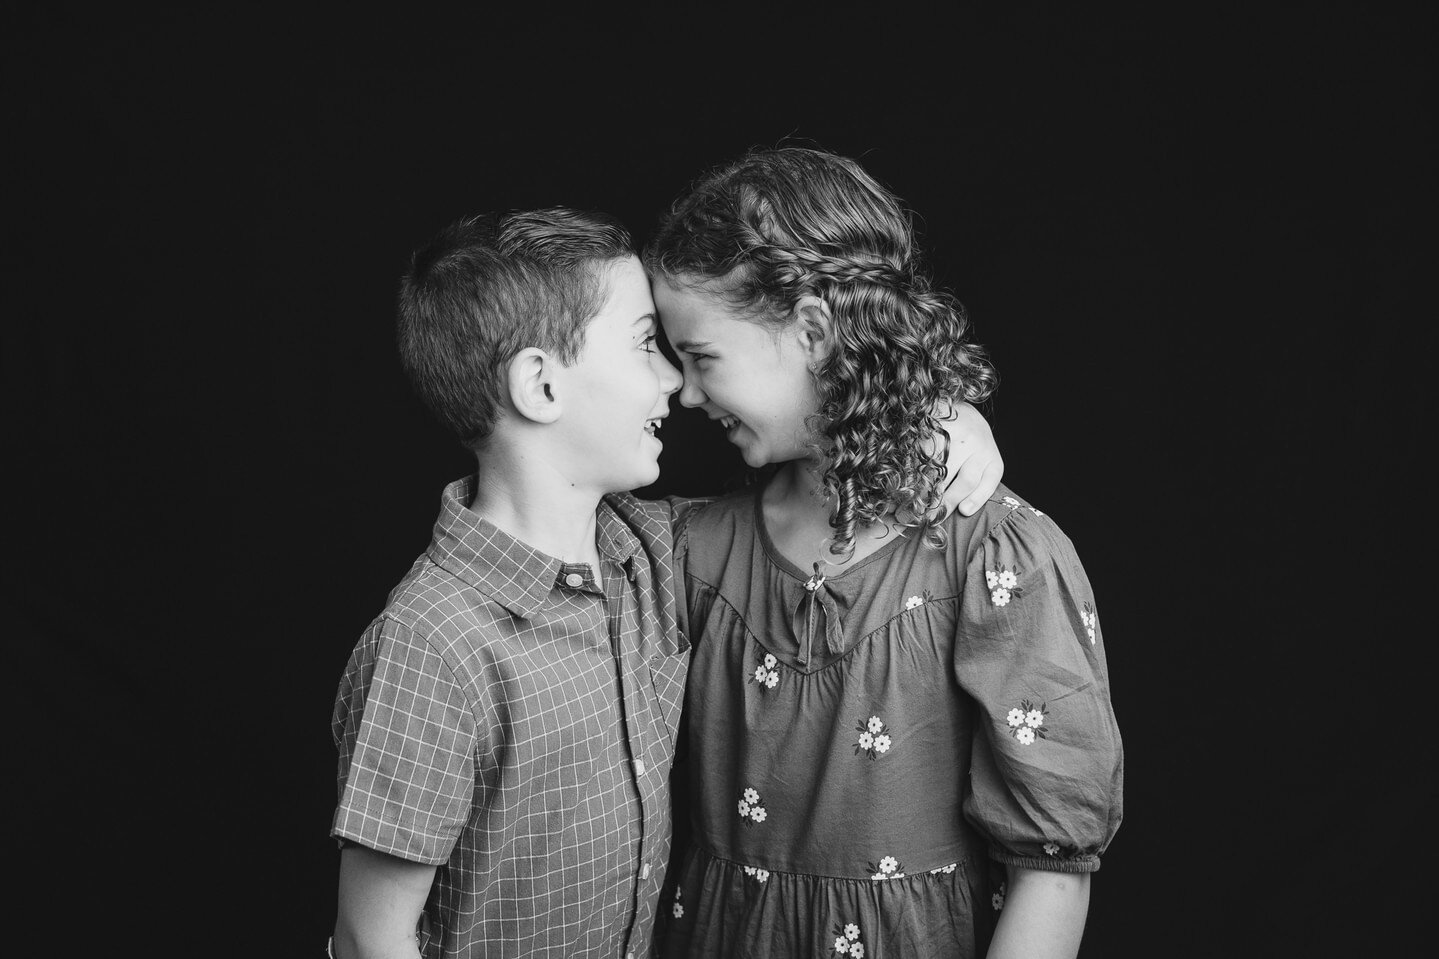 Better Than School Portraits, May 20th, goes live for booking tomorrow (Monday) to newsletter subscribers.⁠
⁠
A short and sweet 15 min. combo session (individual portraits plus siblings together) will capture who they are before the school year ends.